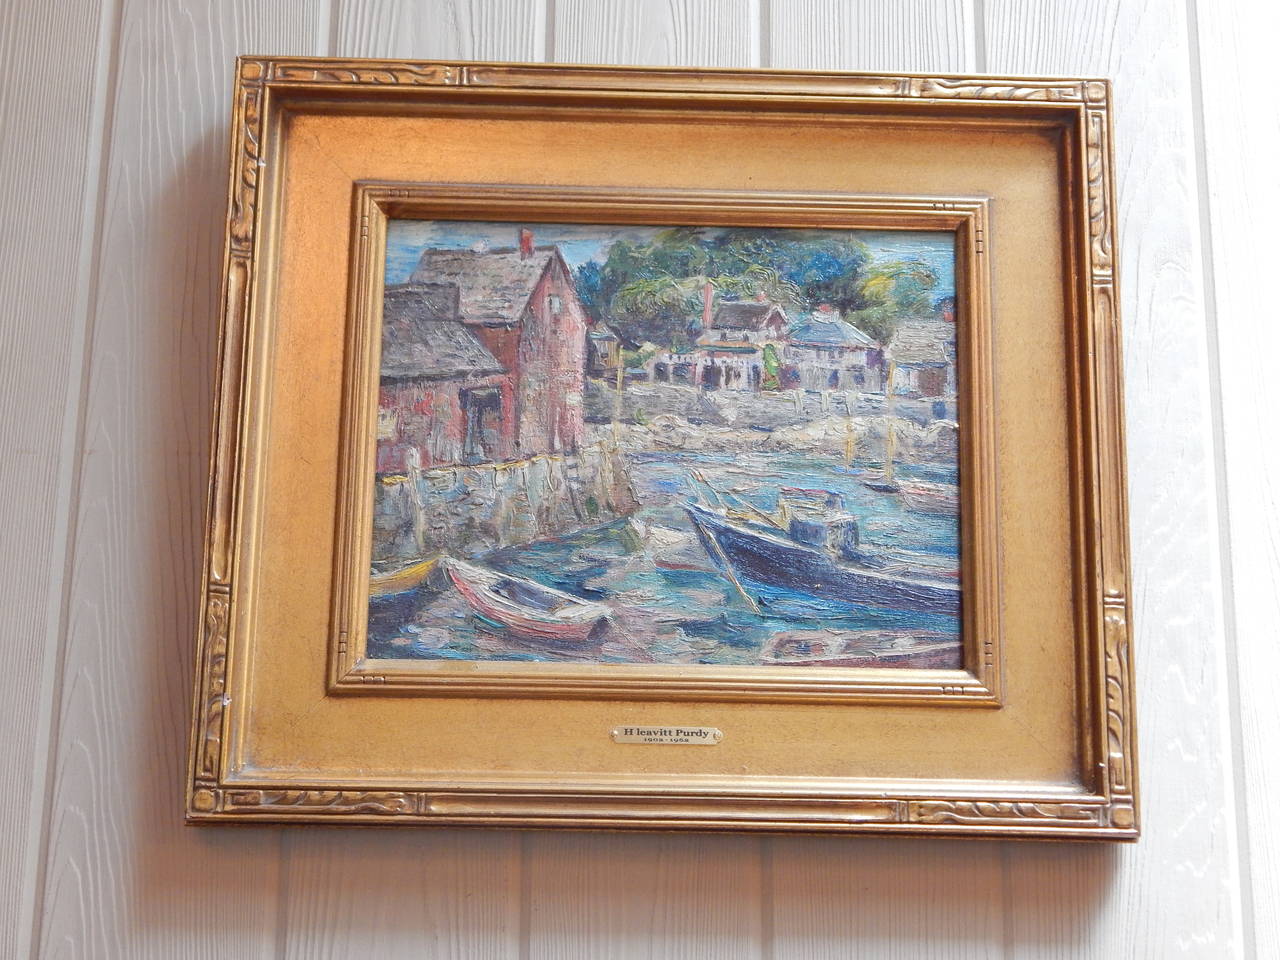 Oil Painting of a Connecticut Harbor, in a gilt wood frame, by
H. Leavitt Purdy
Sight size 10.5